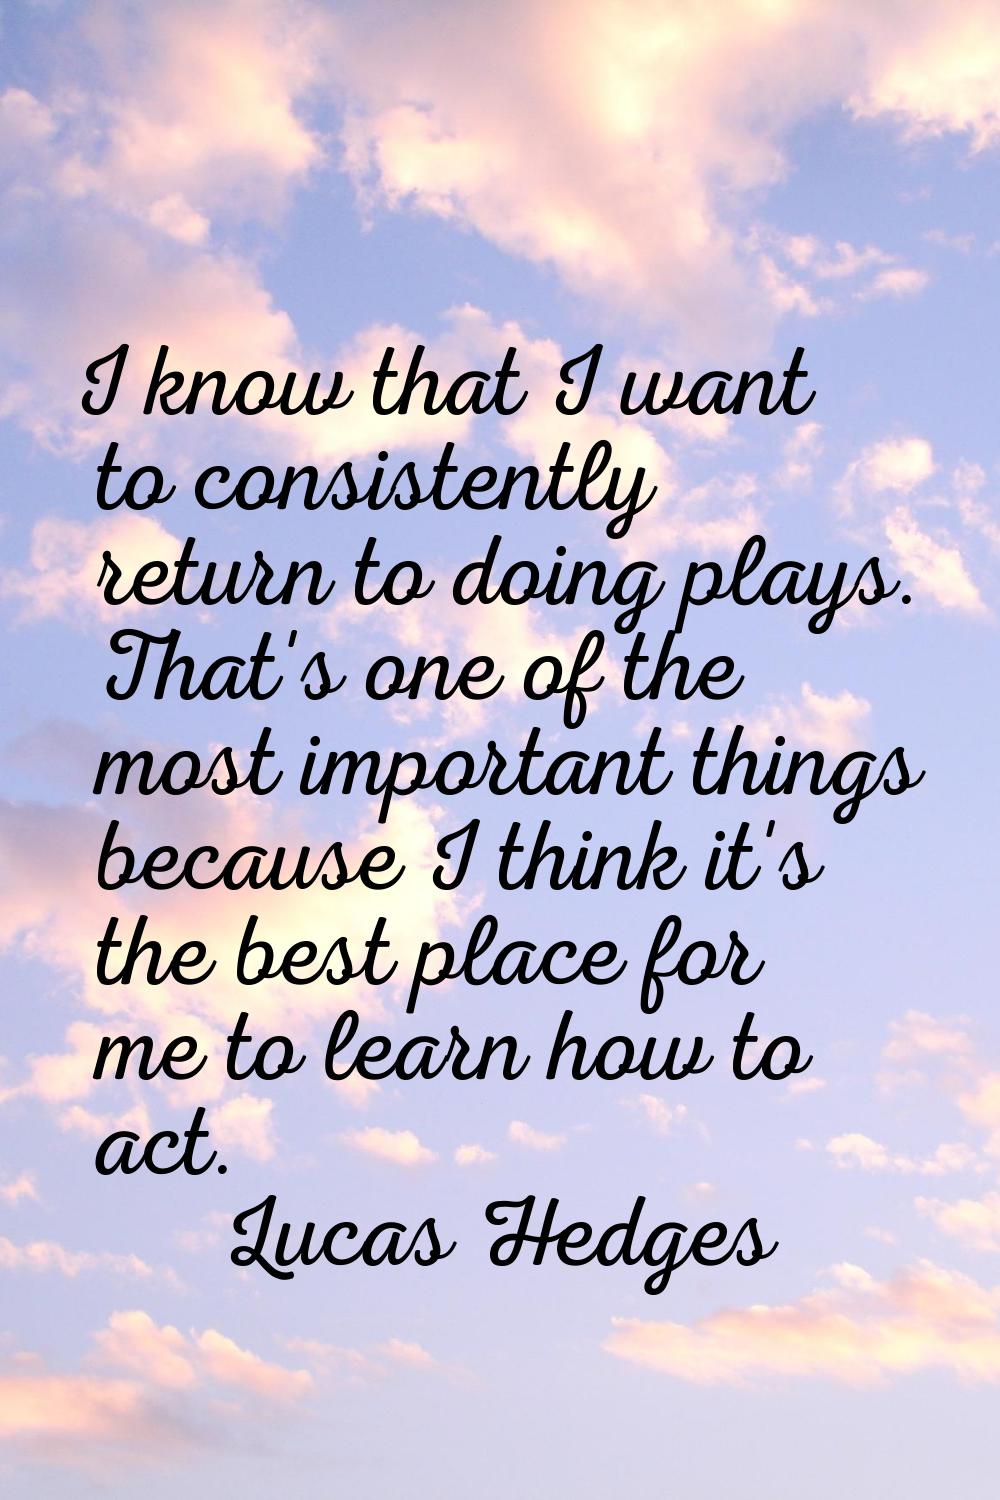 I know that I want to consistently return to doing plays. That's one of the most important things b